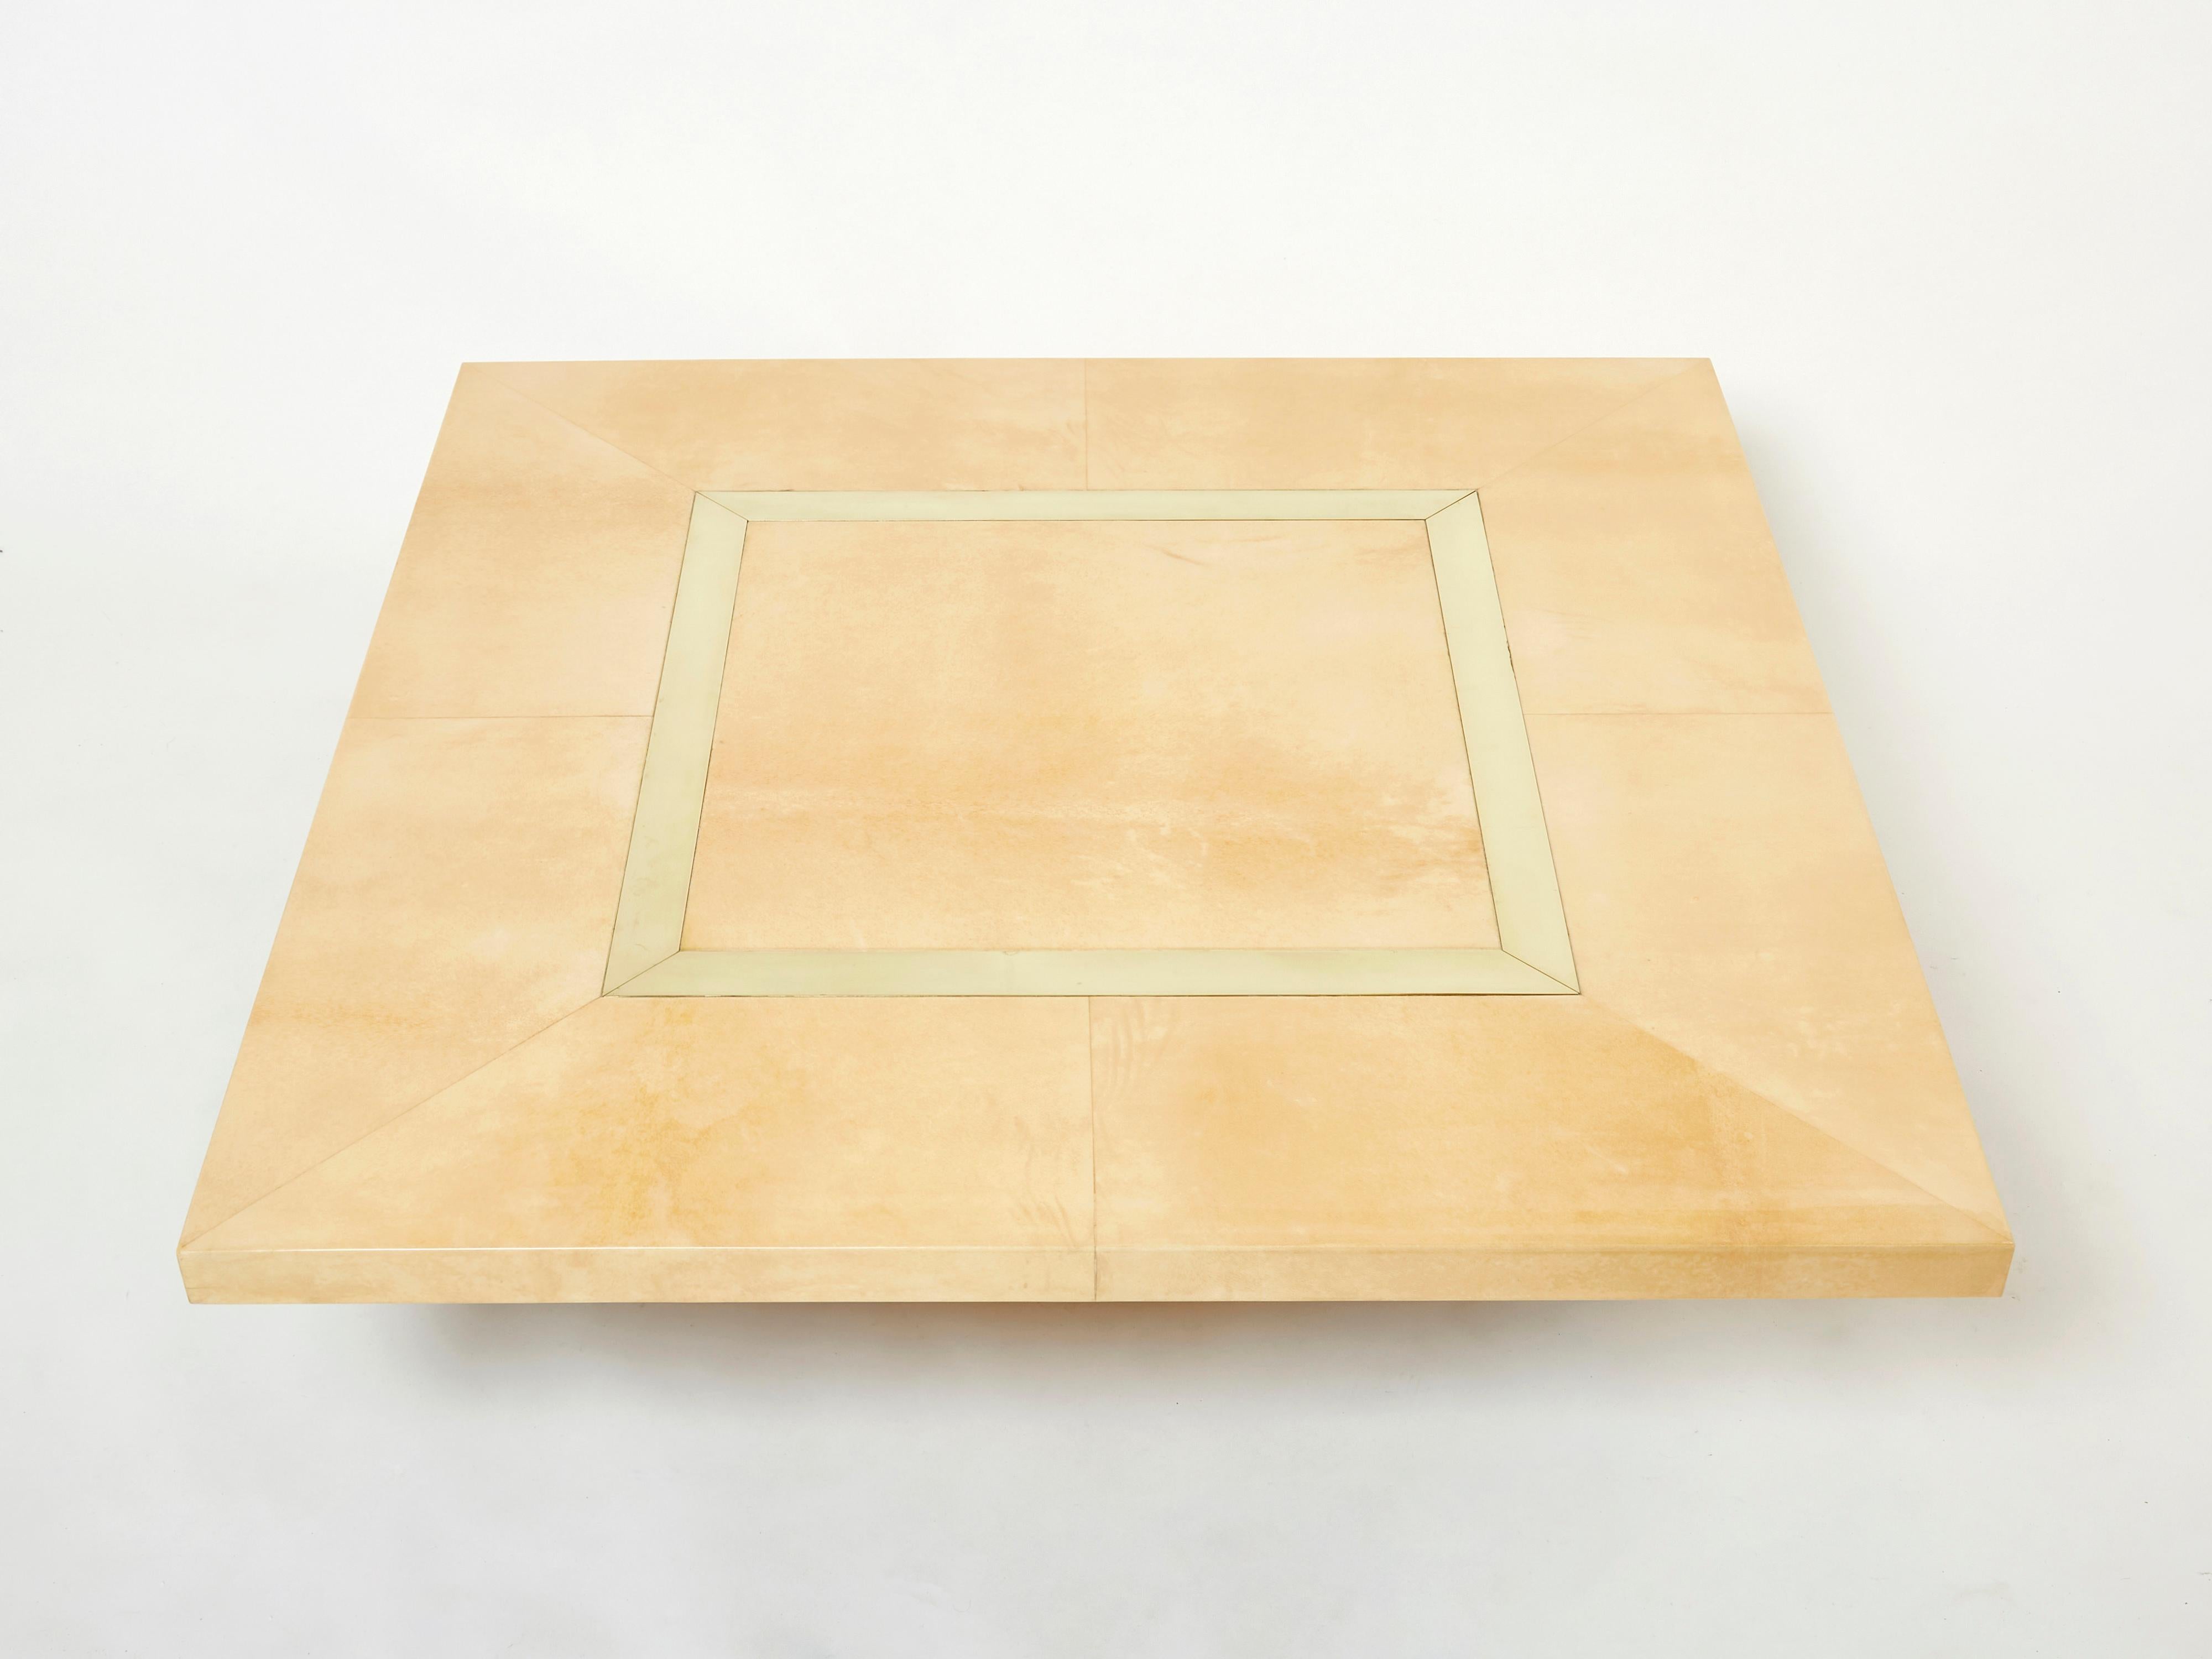 The varnished goatskin parchment, in rich shades of beige, makes this coffee table typical of designer Aldo Tura. This large square piece would make a fascinating centerpiece for any living room. It’s been beautifully finished for a smooth, glossy